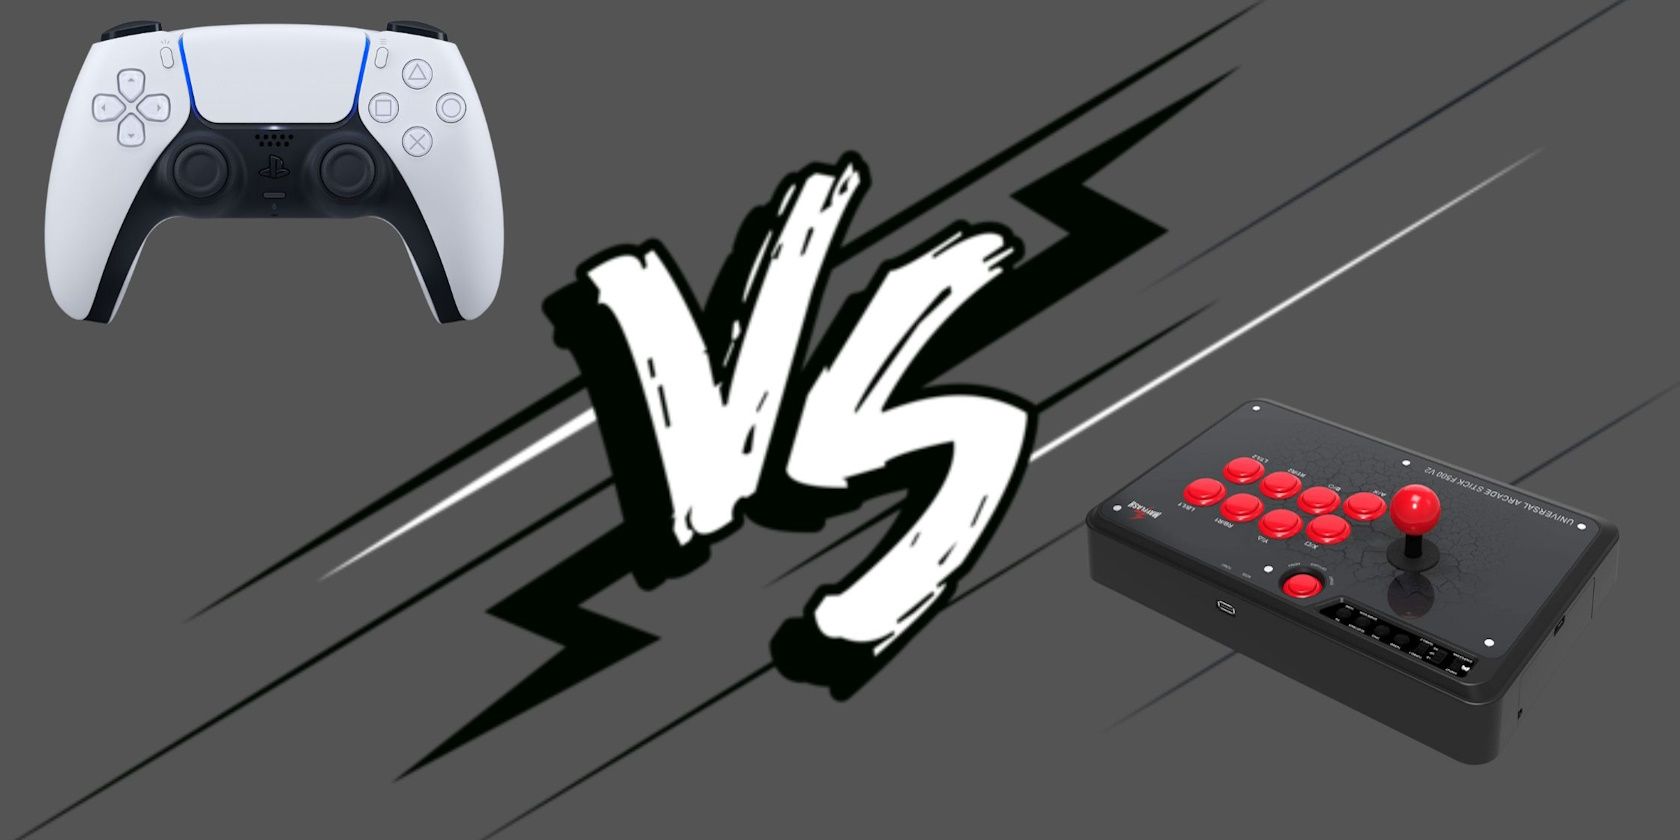 Controller and Arcade stick with a versus sign in between 